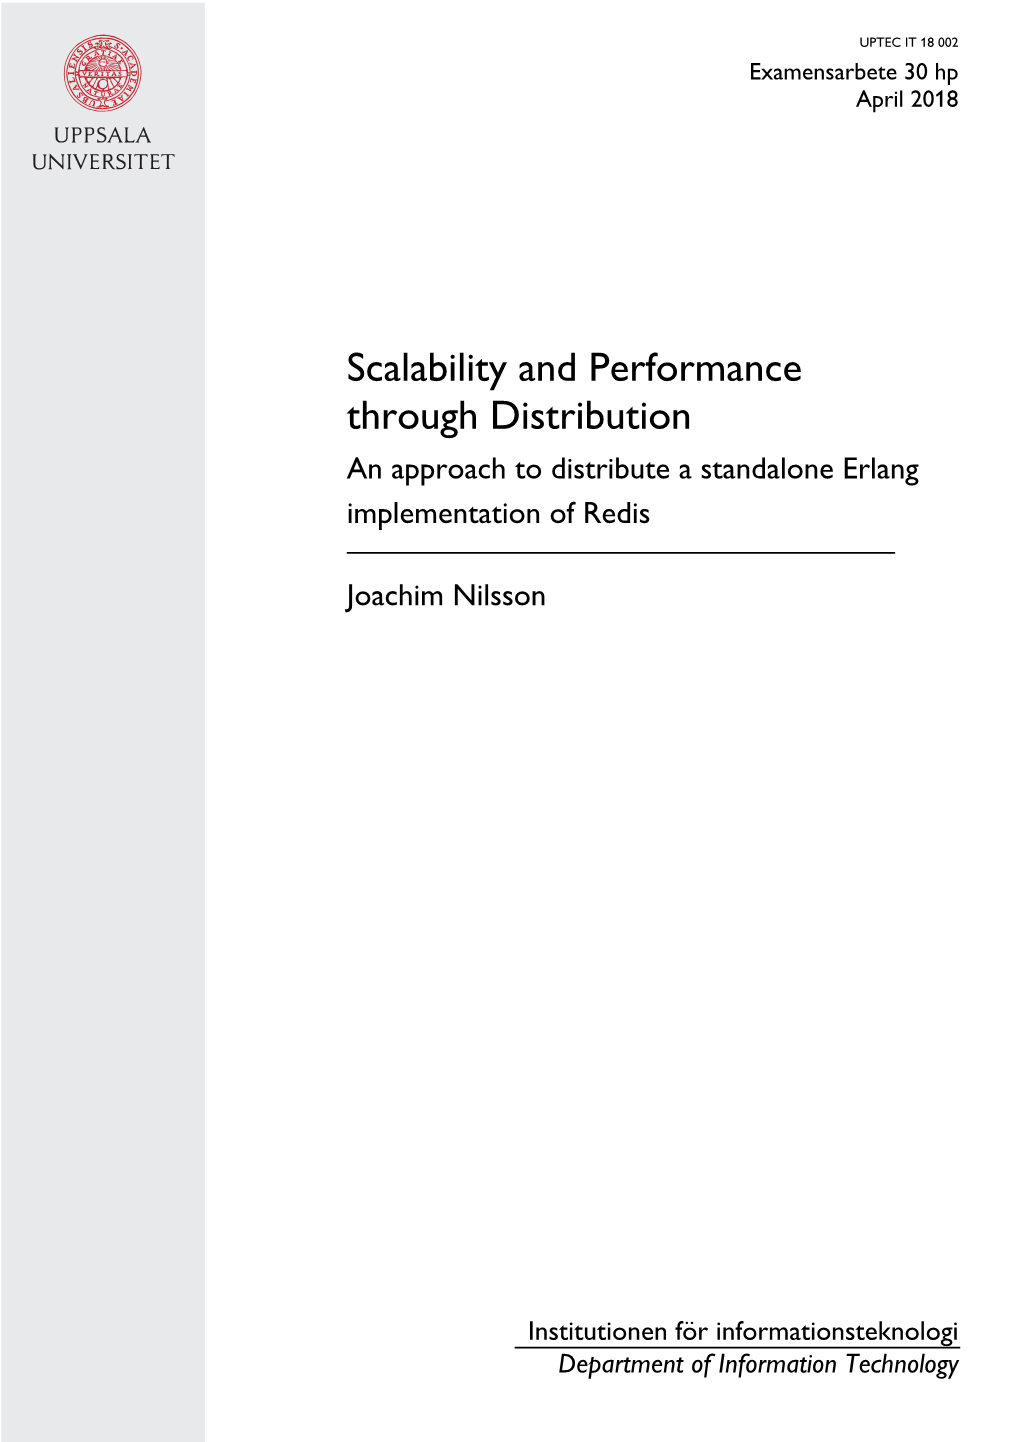 Scalability and Performance Through Distribution an Approach to Distribute a Standalone Erlang Implementation of Redis